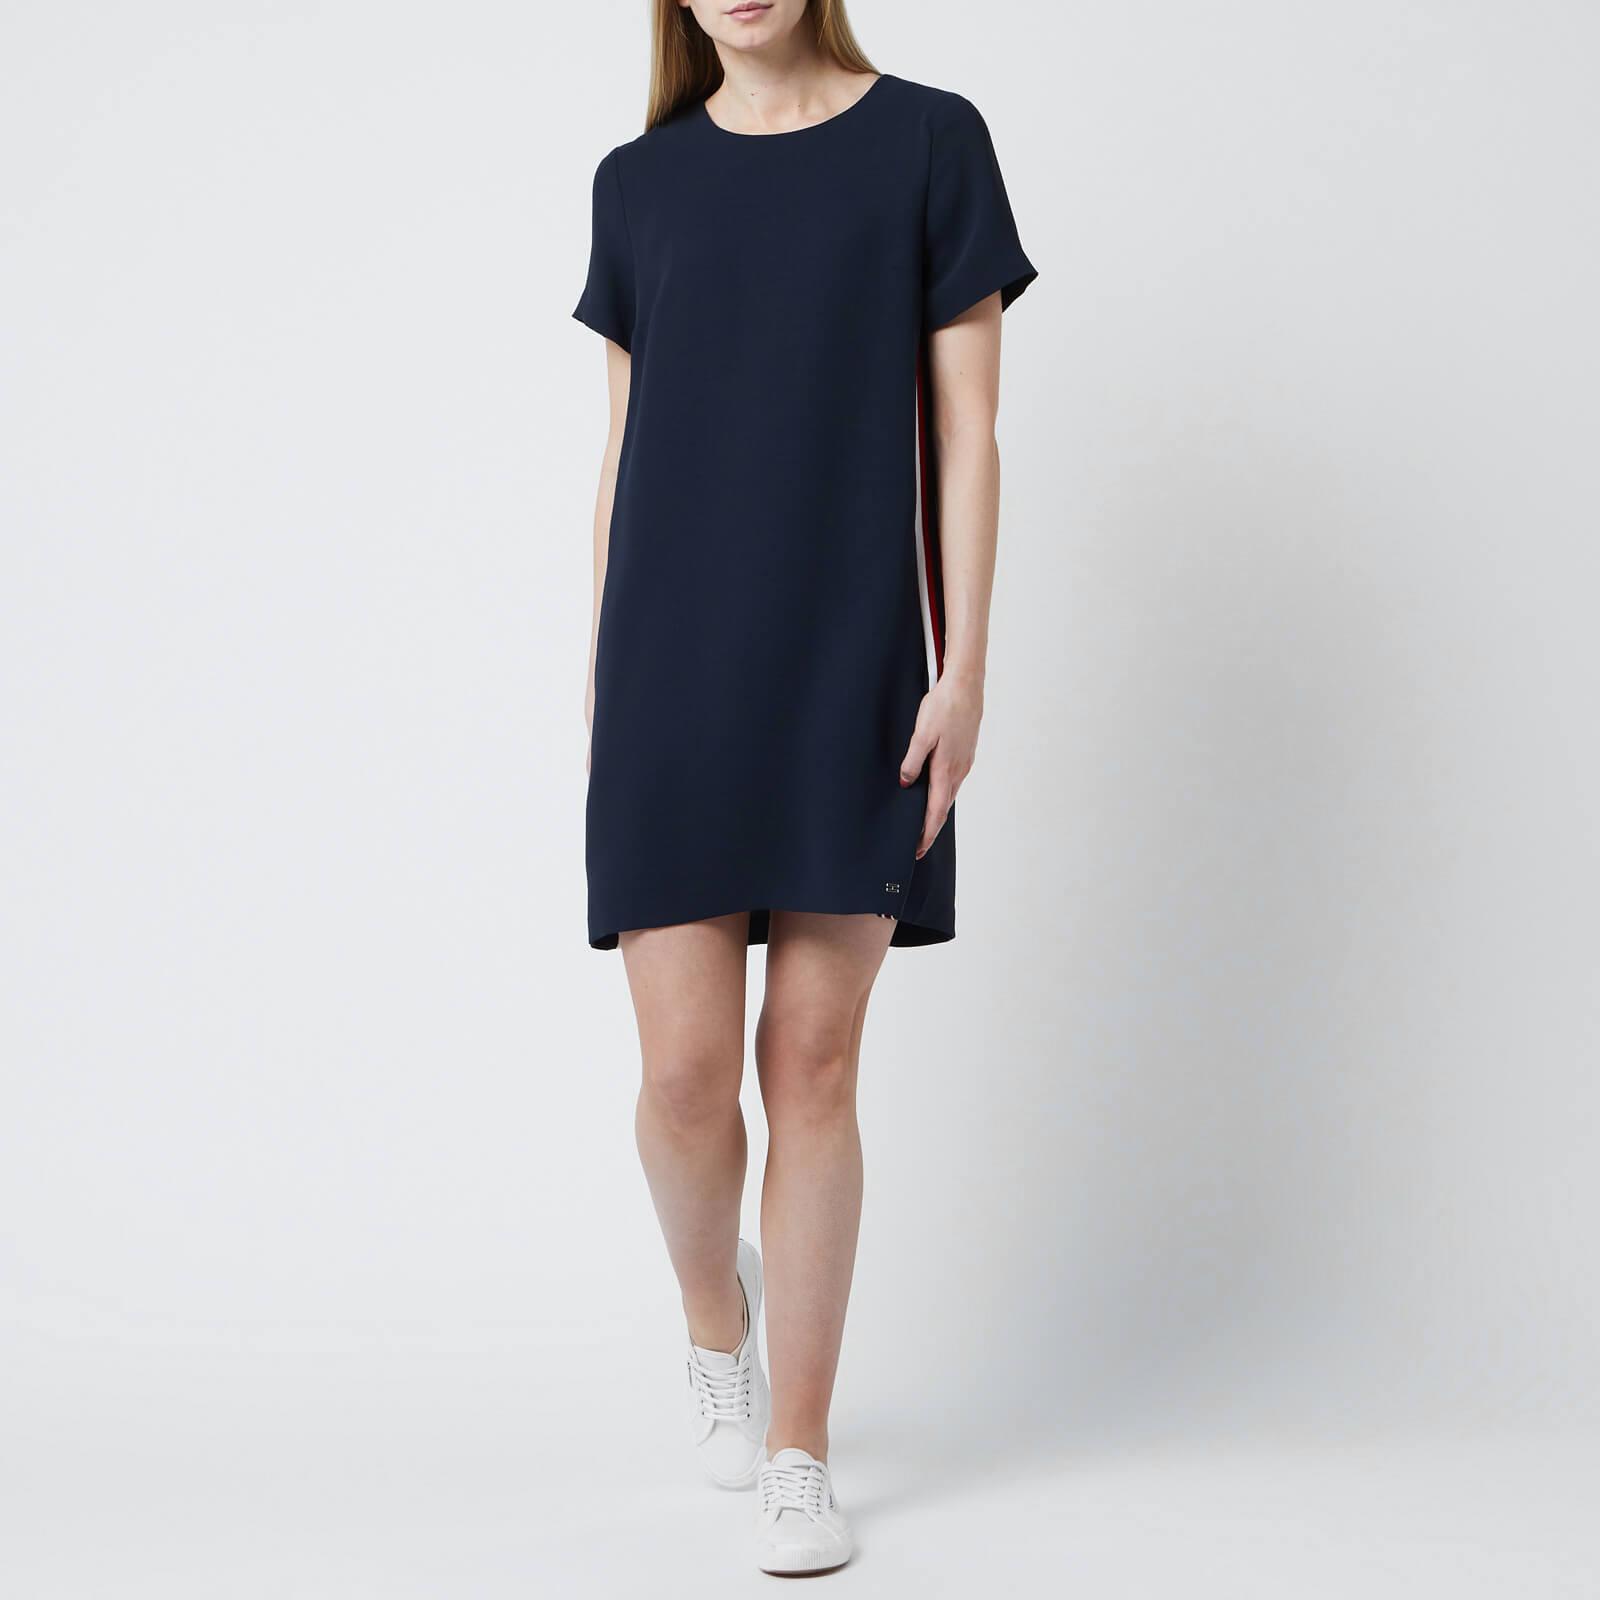 Tommy Hilfiger Synthetic Anita Dress in 